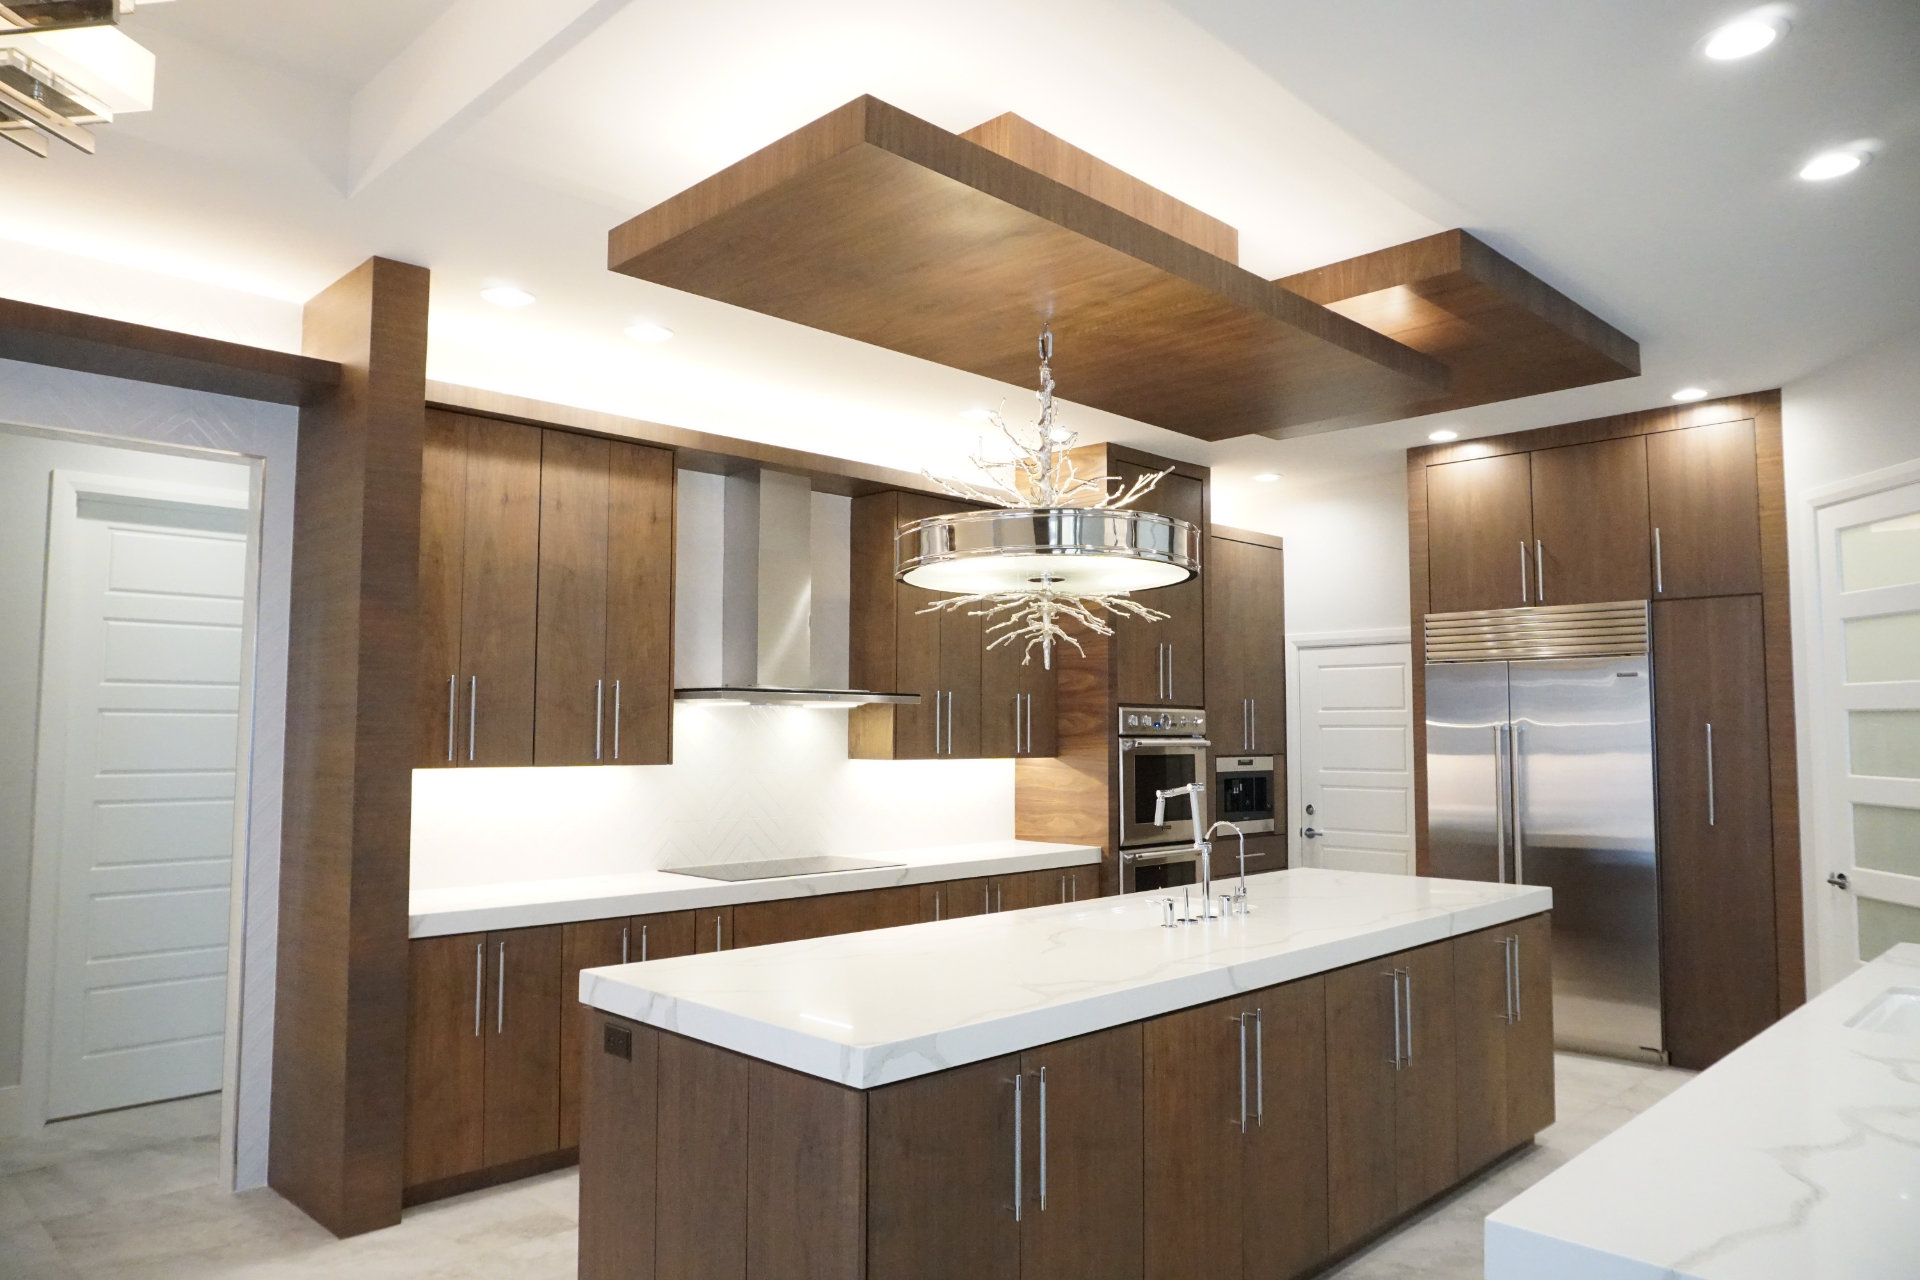 Kitchen with custom built in cabinets and island